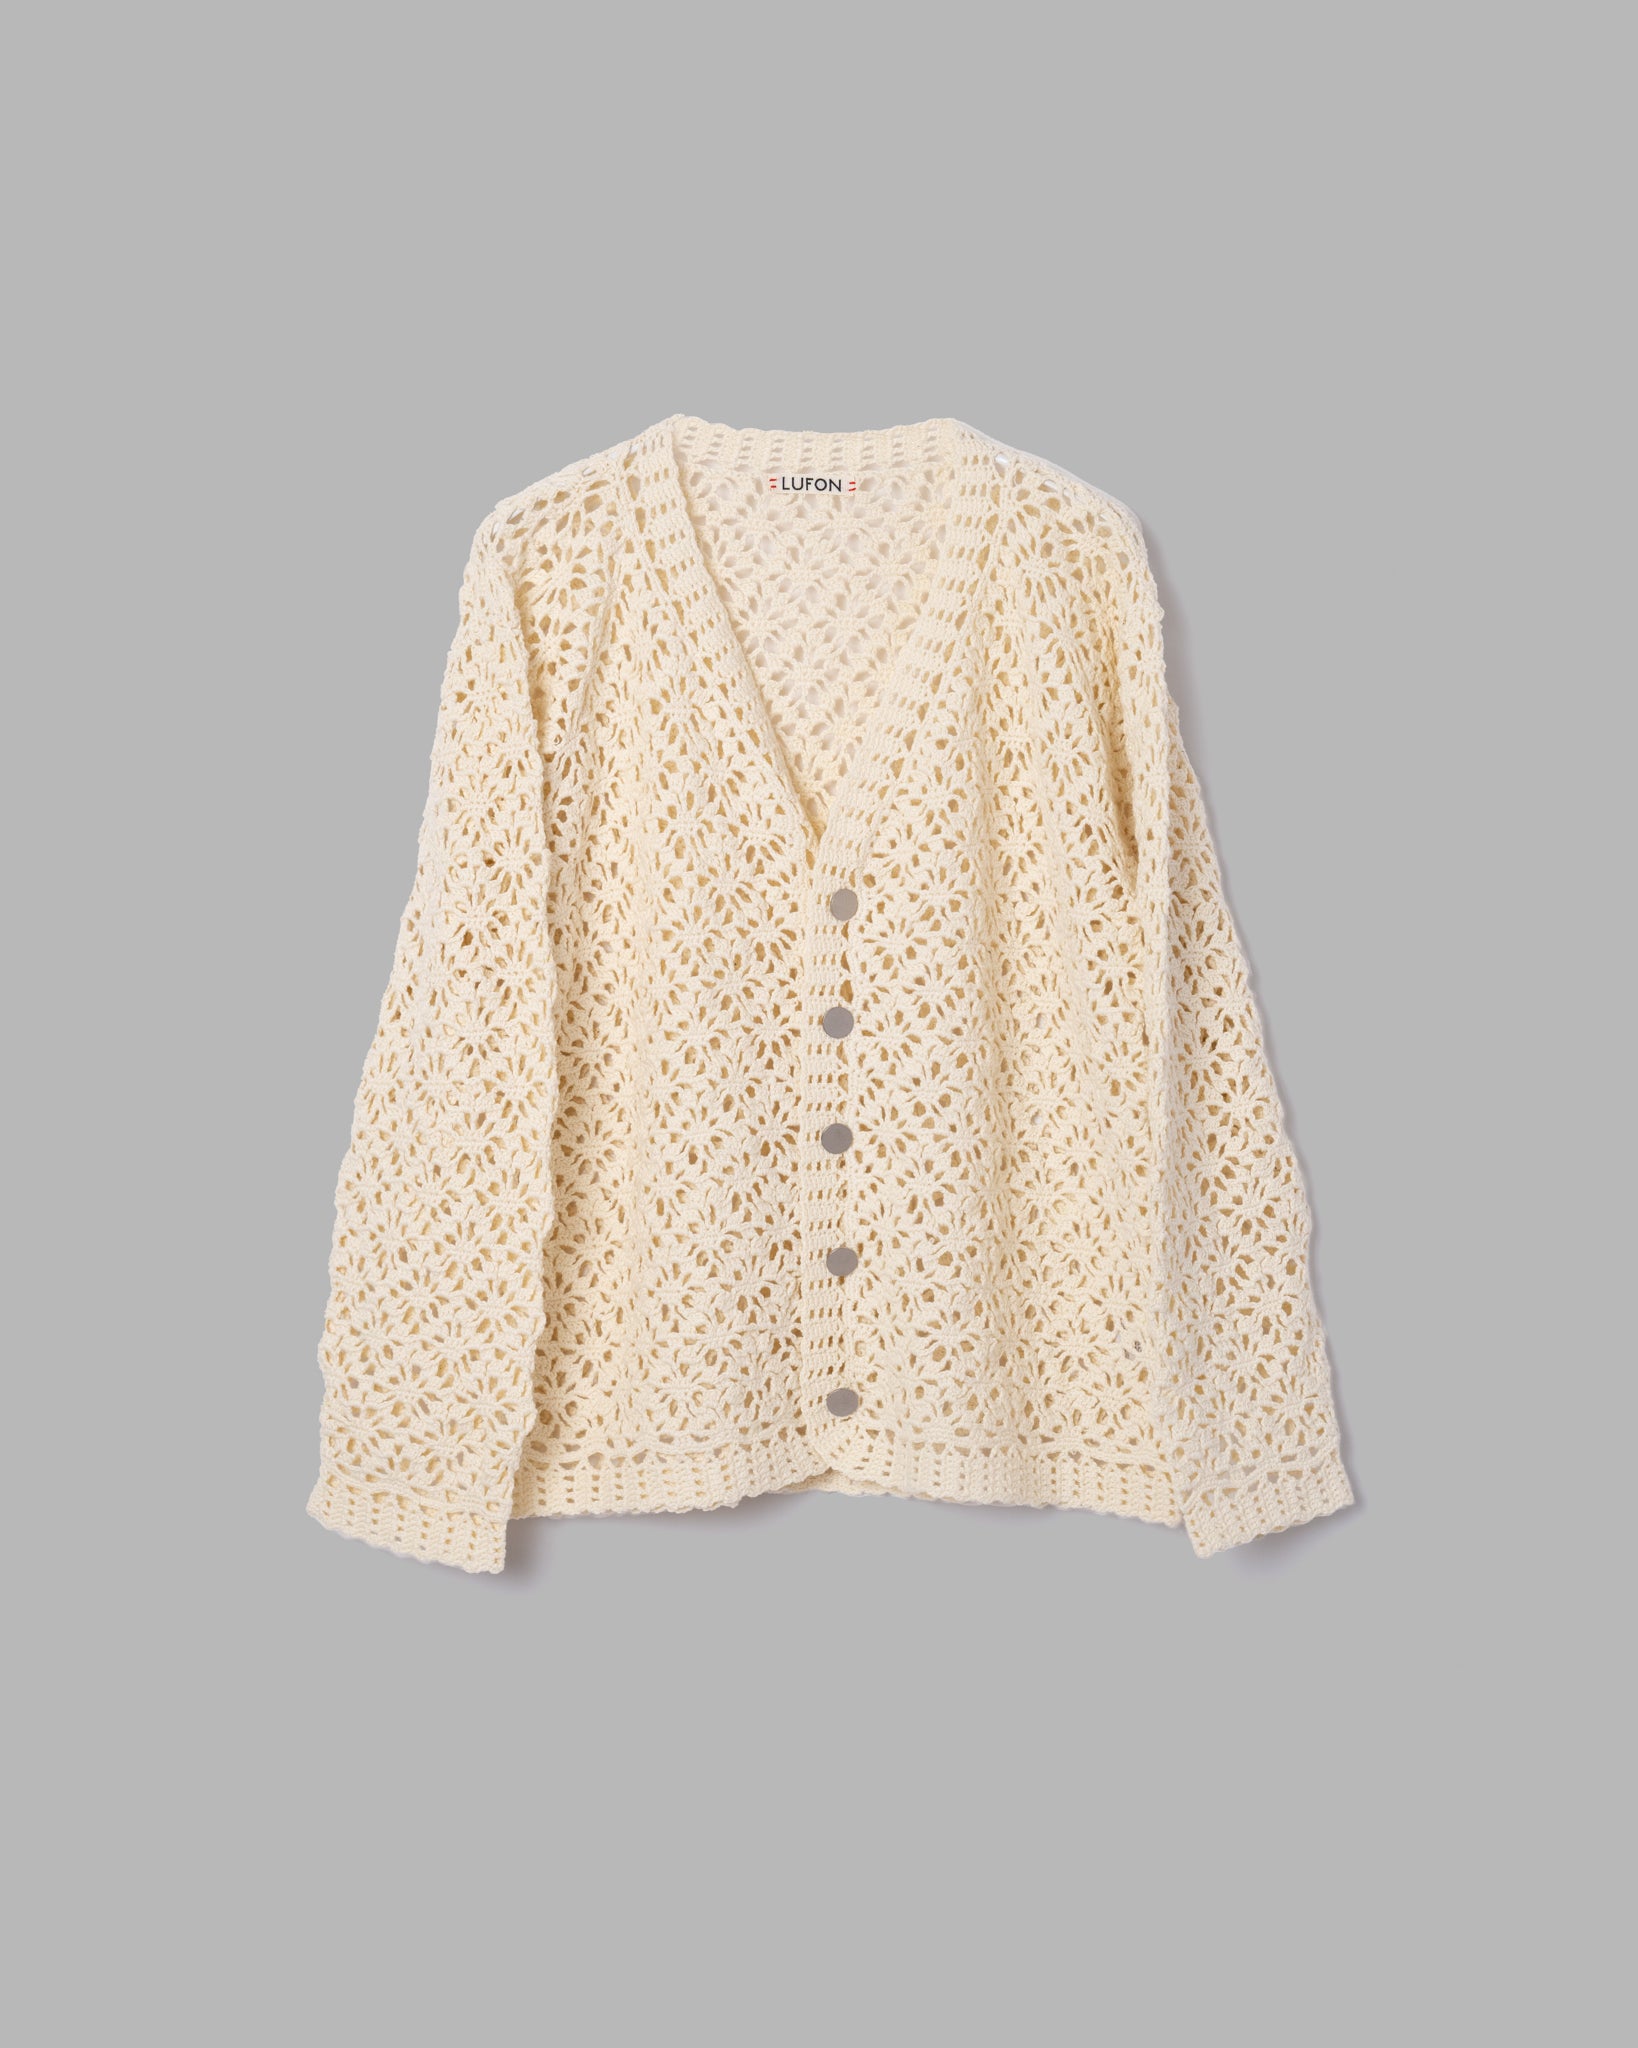 [Reservation Sales] Crochet Hand Knit Cardigan -Off White